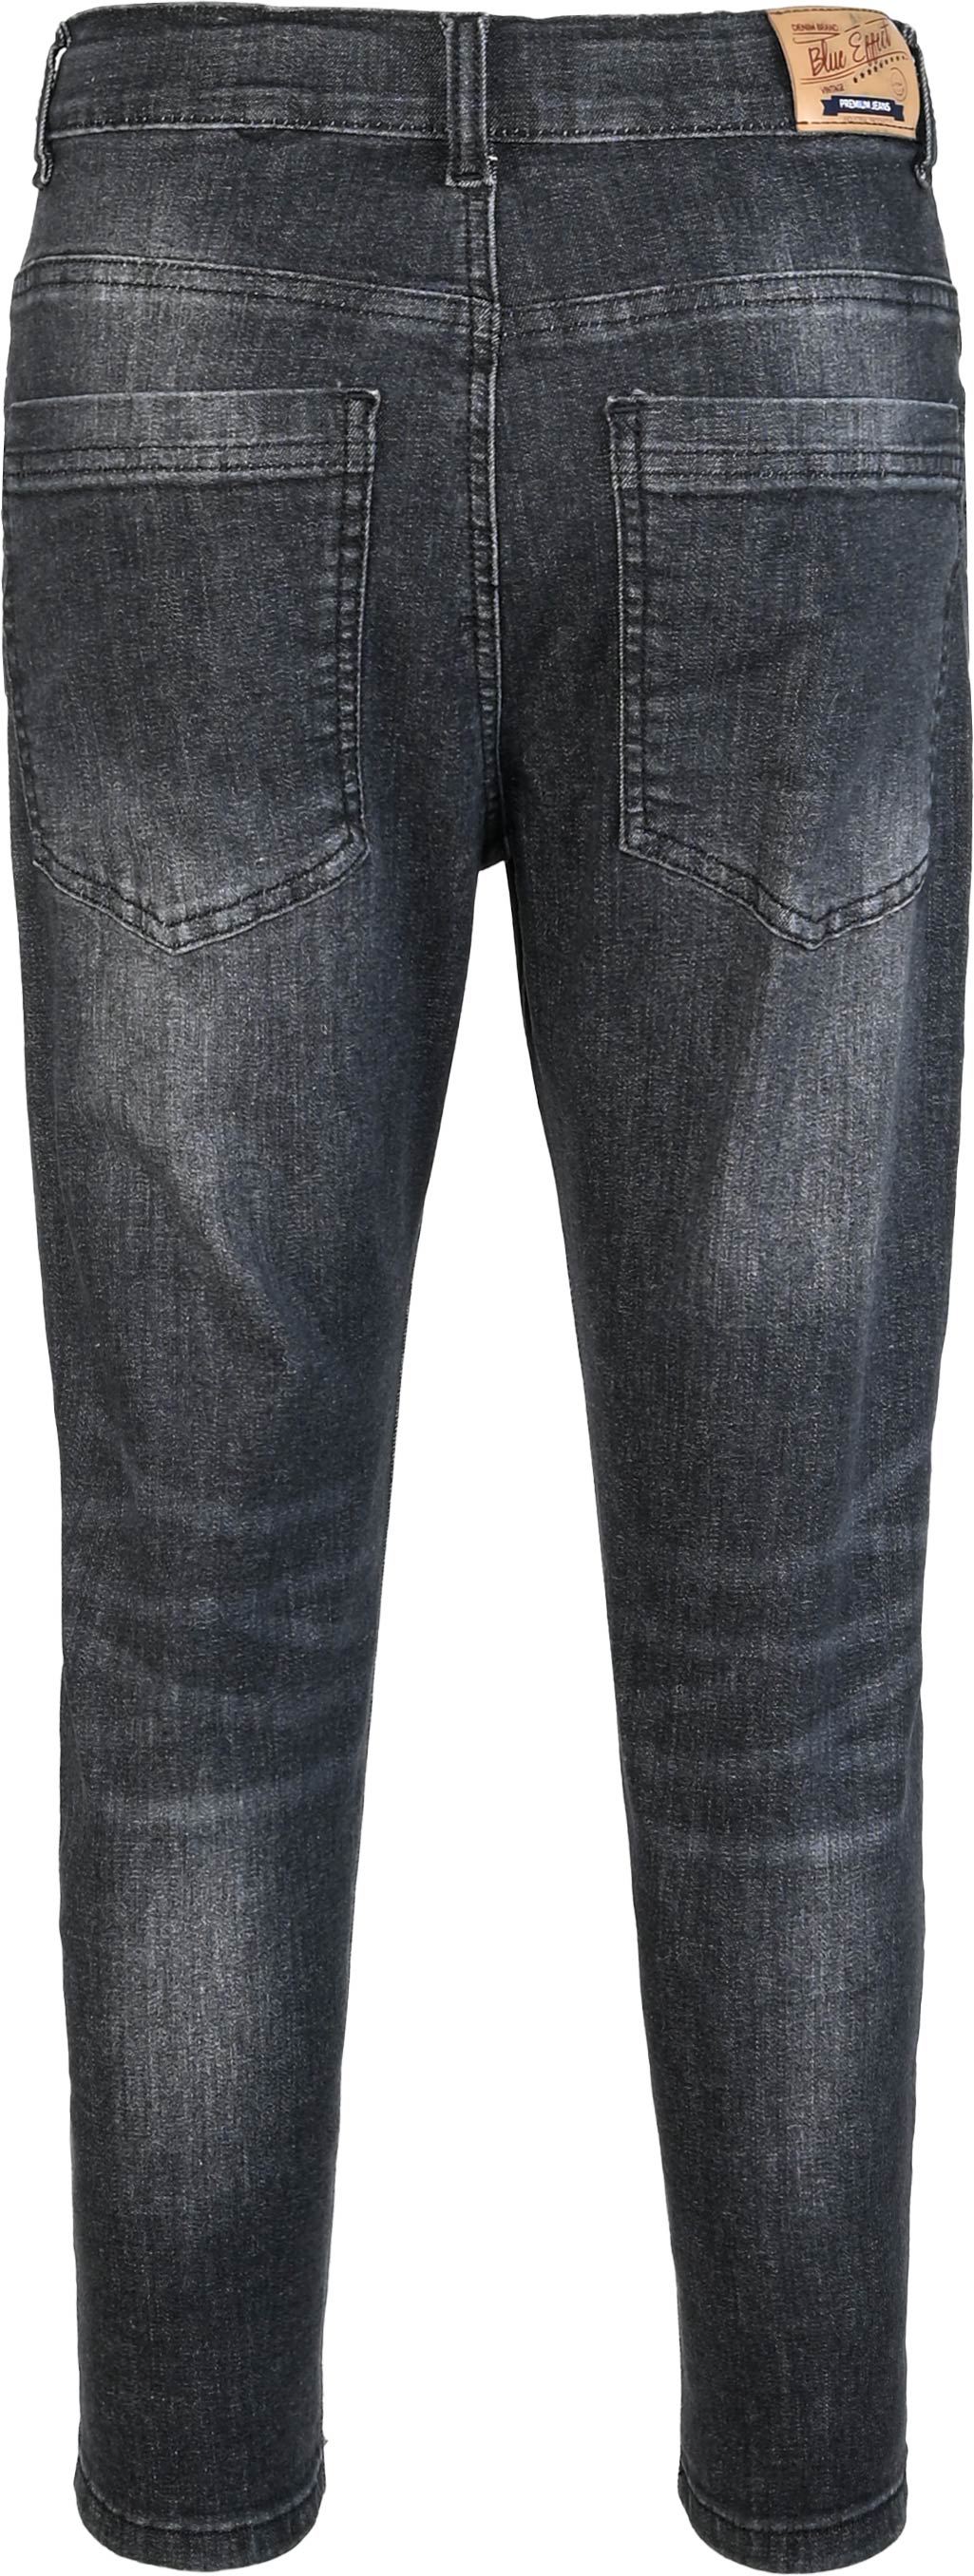 2813-NOS Boys Loose Fit Jeans  available in Slim,Normal